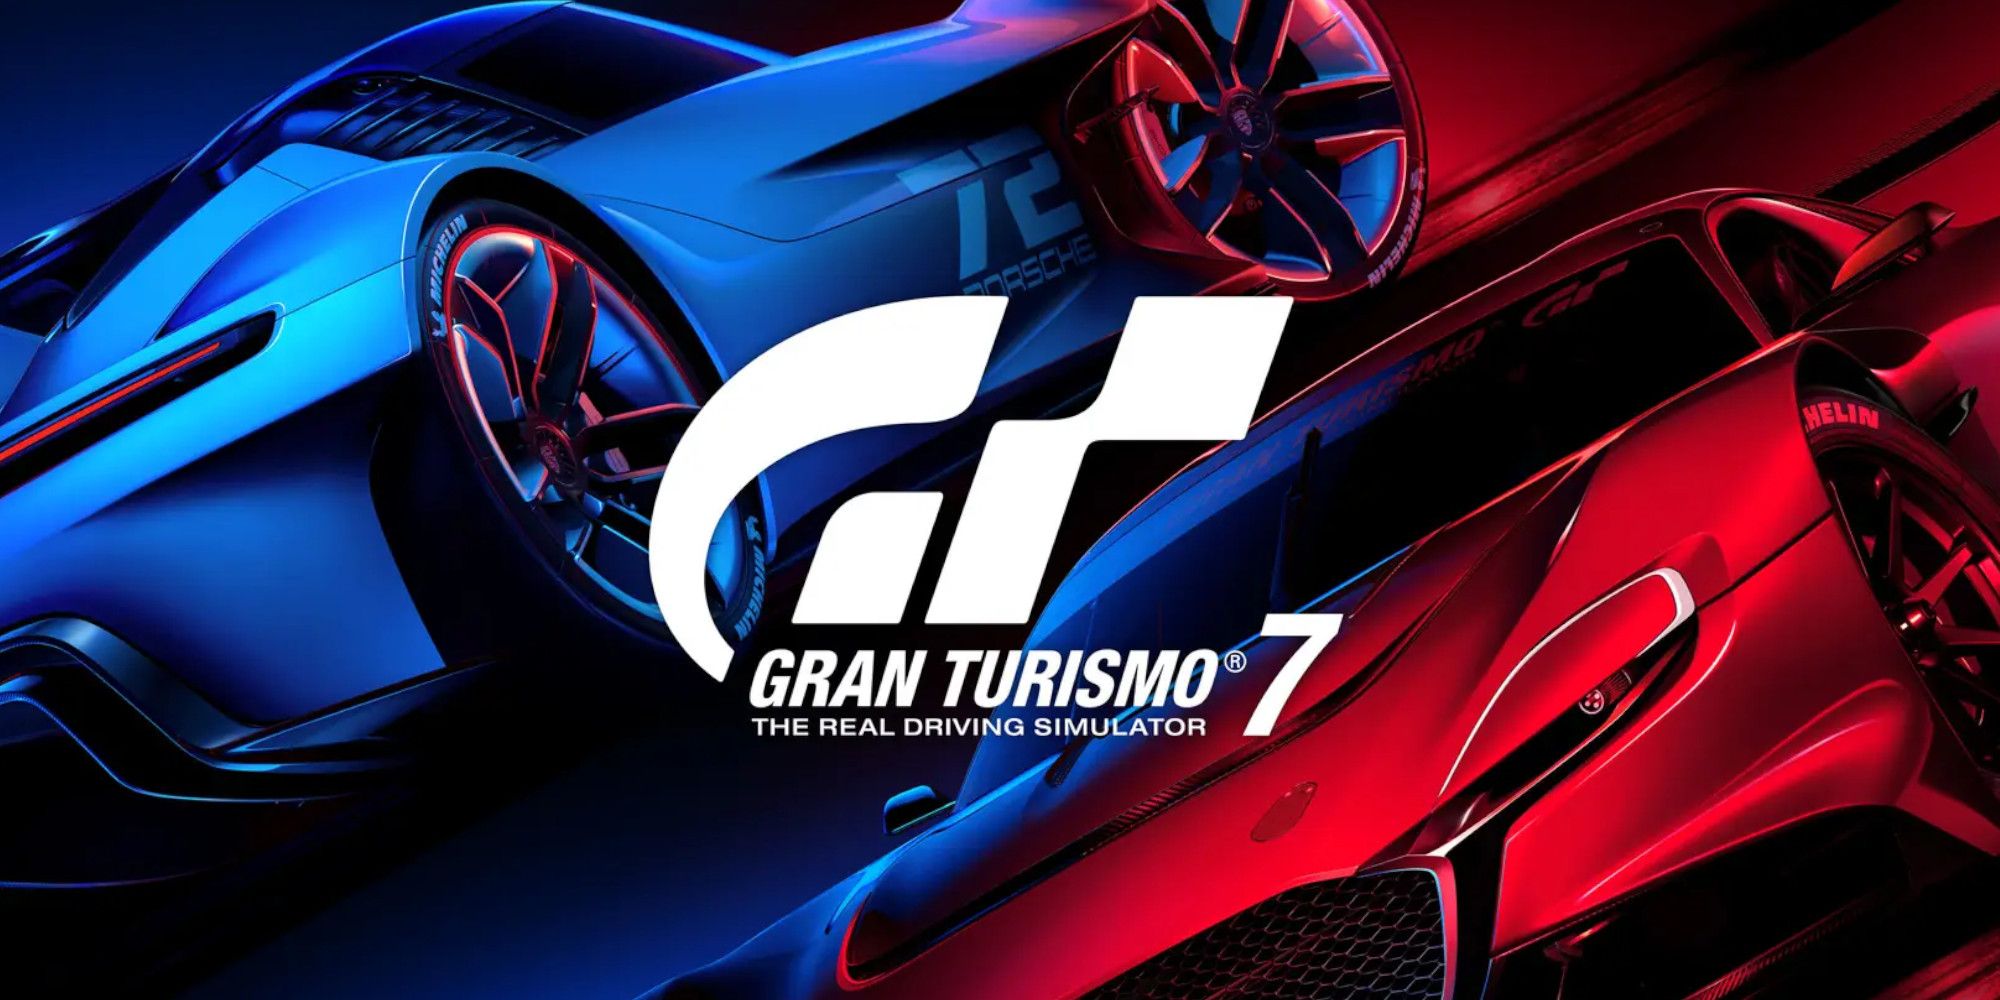 gram turismo promo art showing a blue porsche and red mazda passing each other